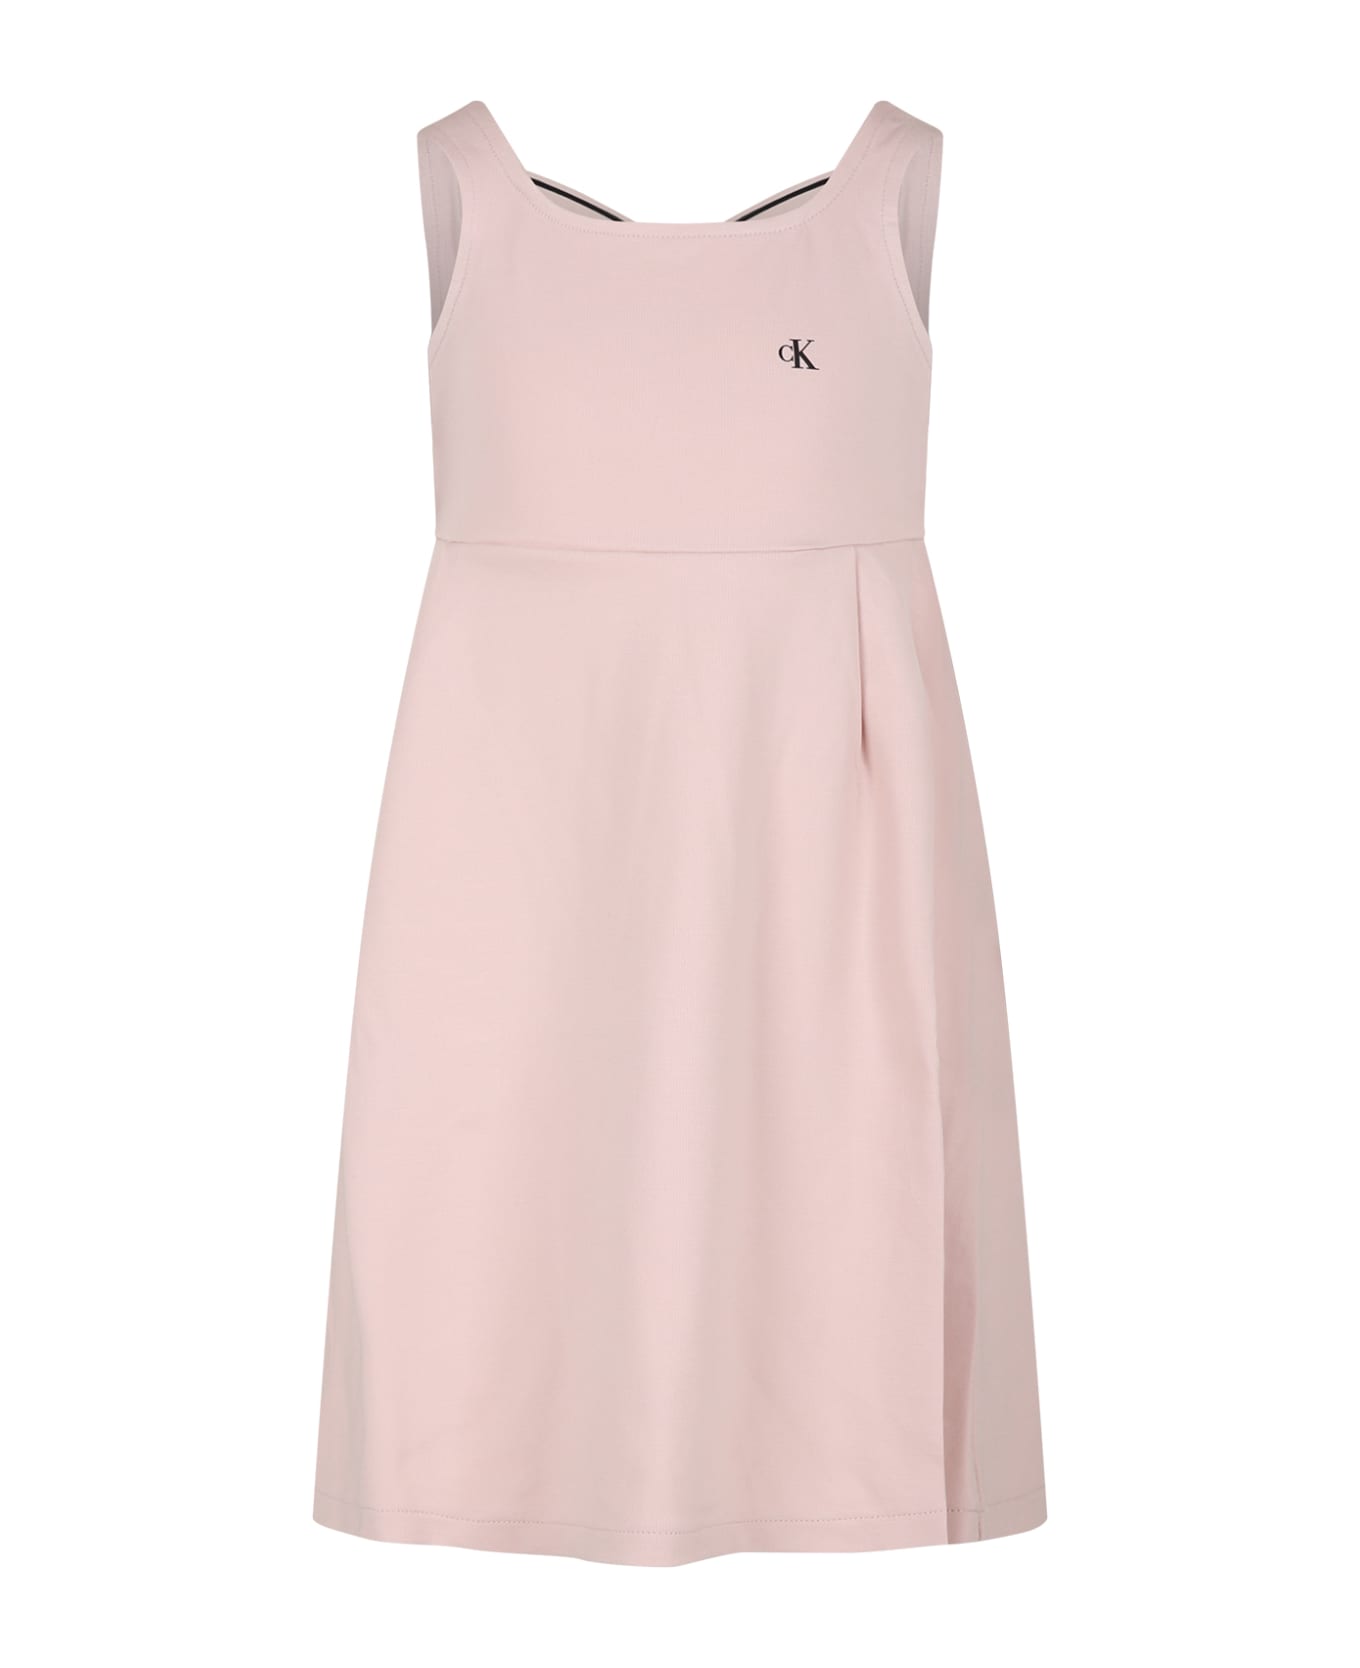 Calvin Klein Pink Dress For Girl With Logo - Pink